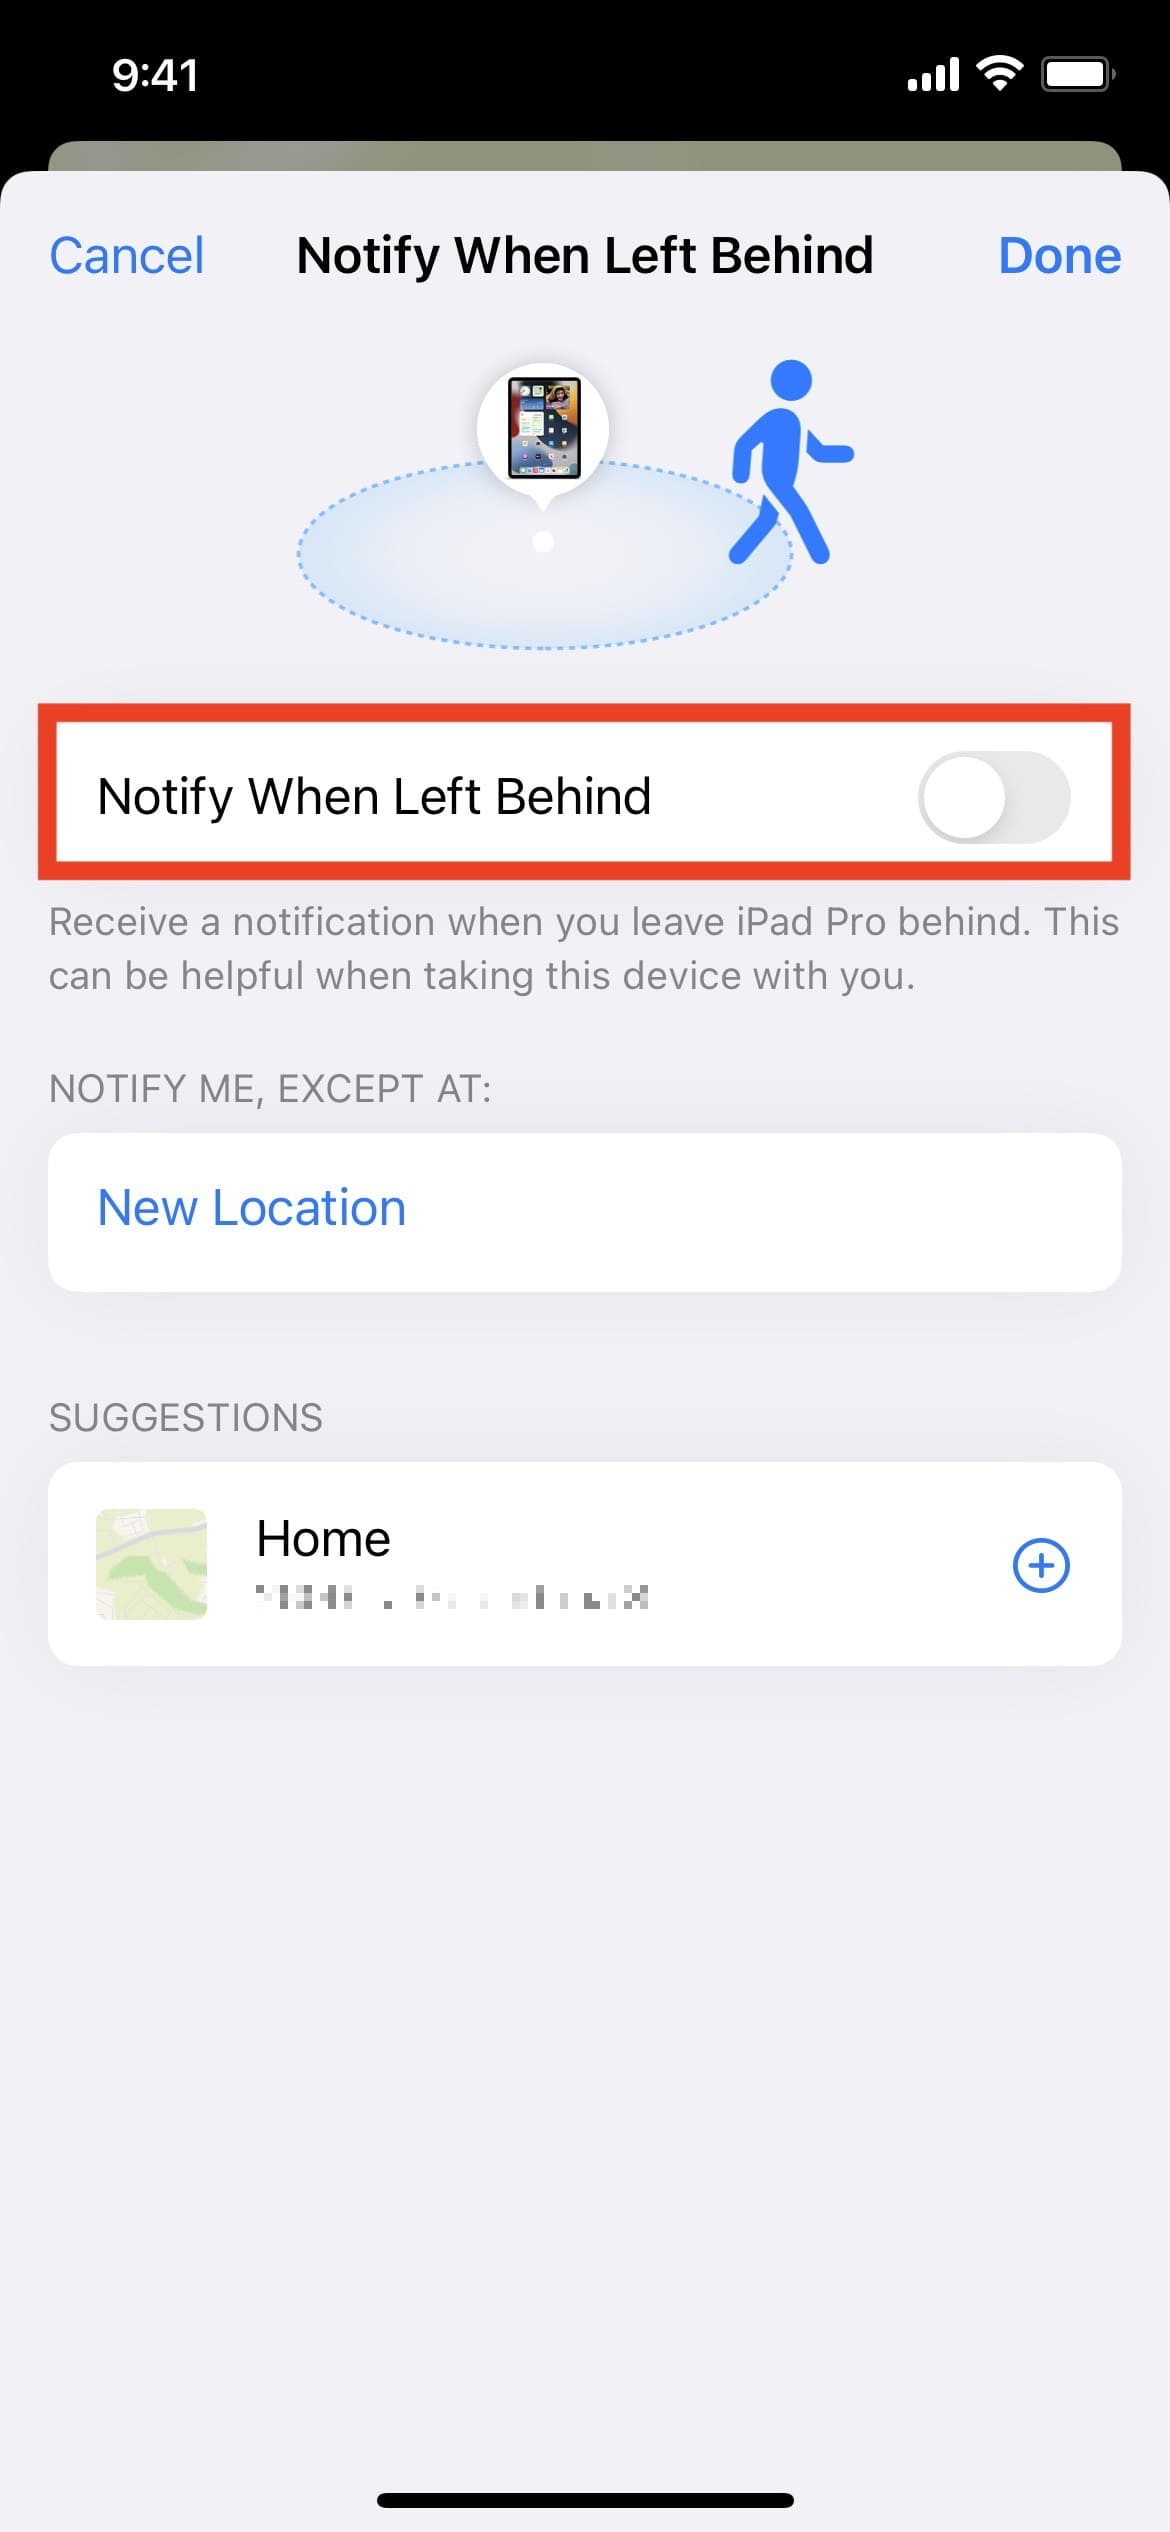 Turn off Notify When Left Behind in Find My app on iPhone in iOS 15